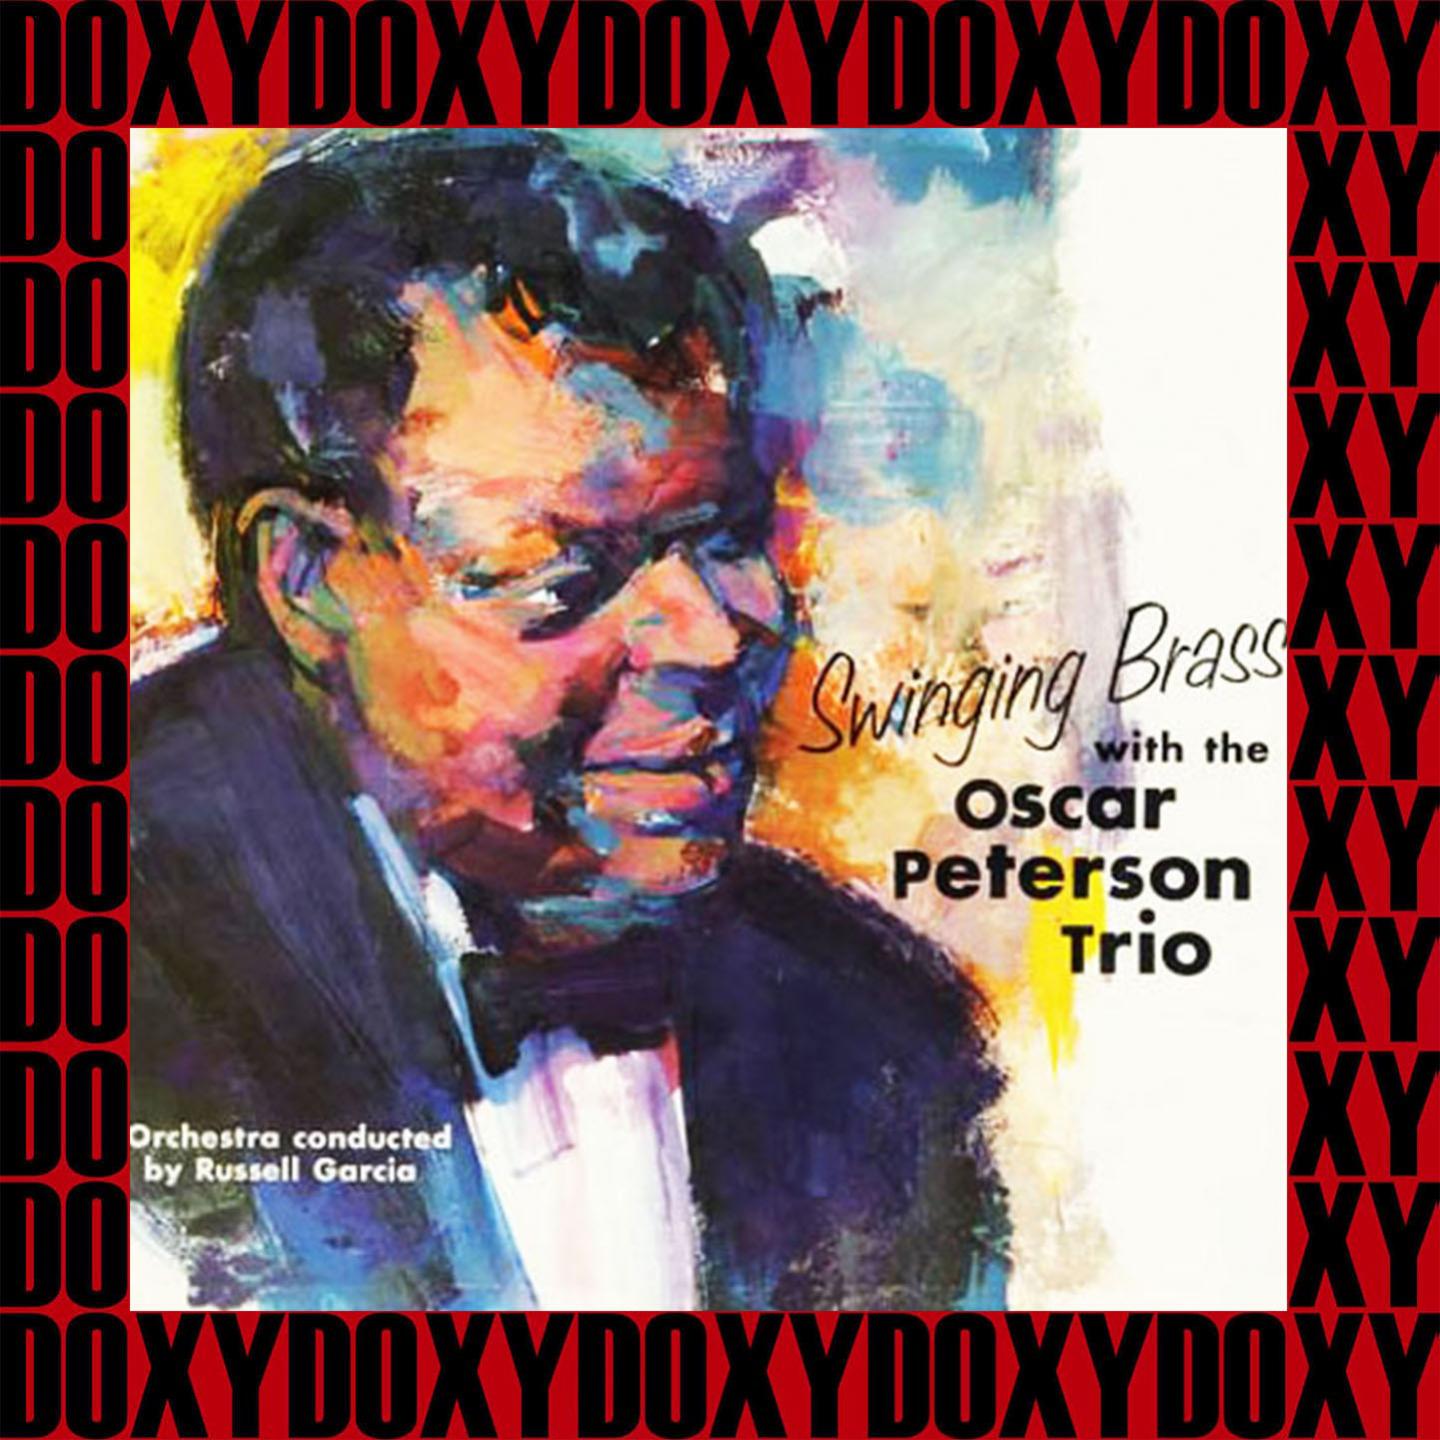 Swinging Brass with The Oscar Peterson Trio (Expanded, Remastered Version) (Doxy Collection)专辑